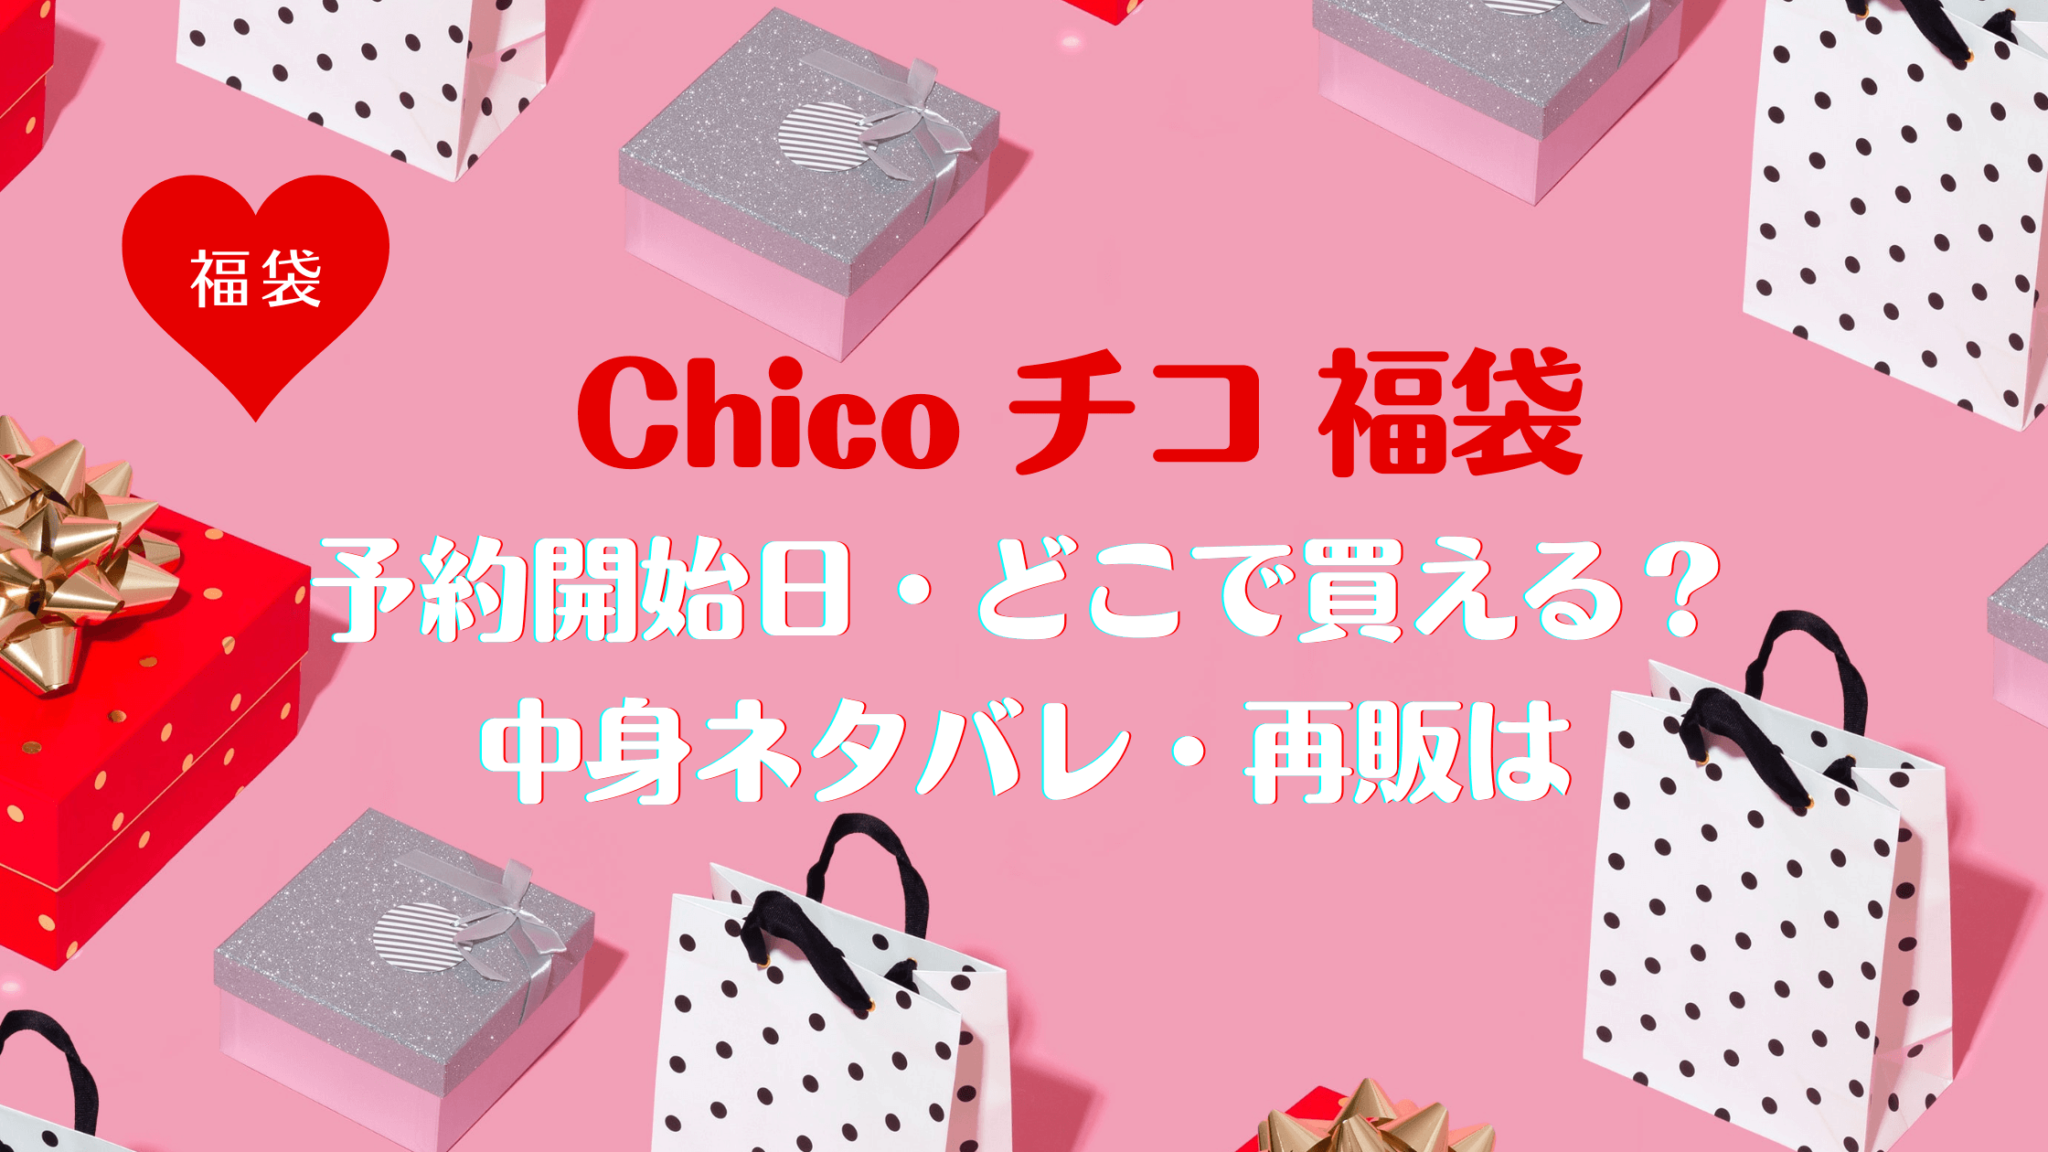 who´s who Chico - chico 福袋 PALPI 4点セットの+giftsmate.net